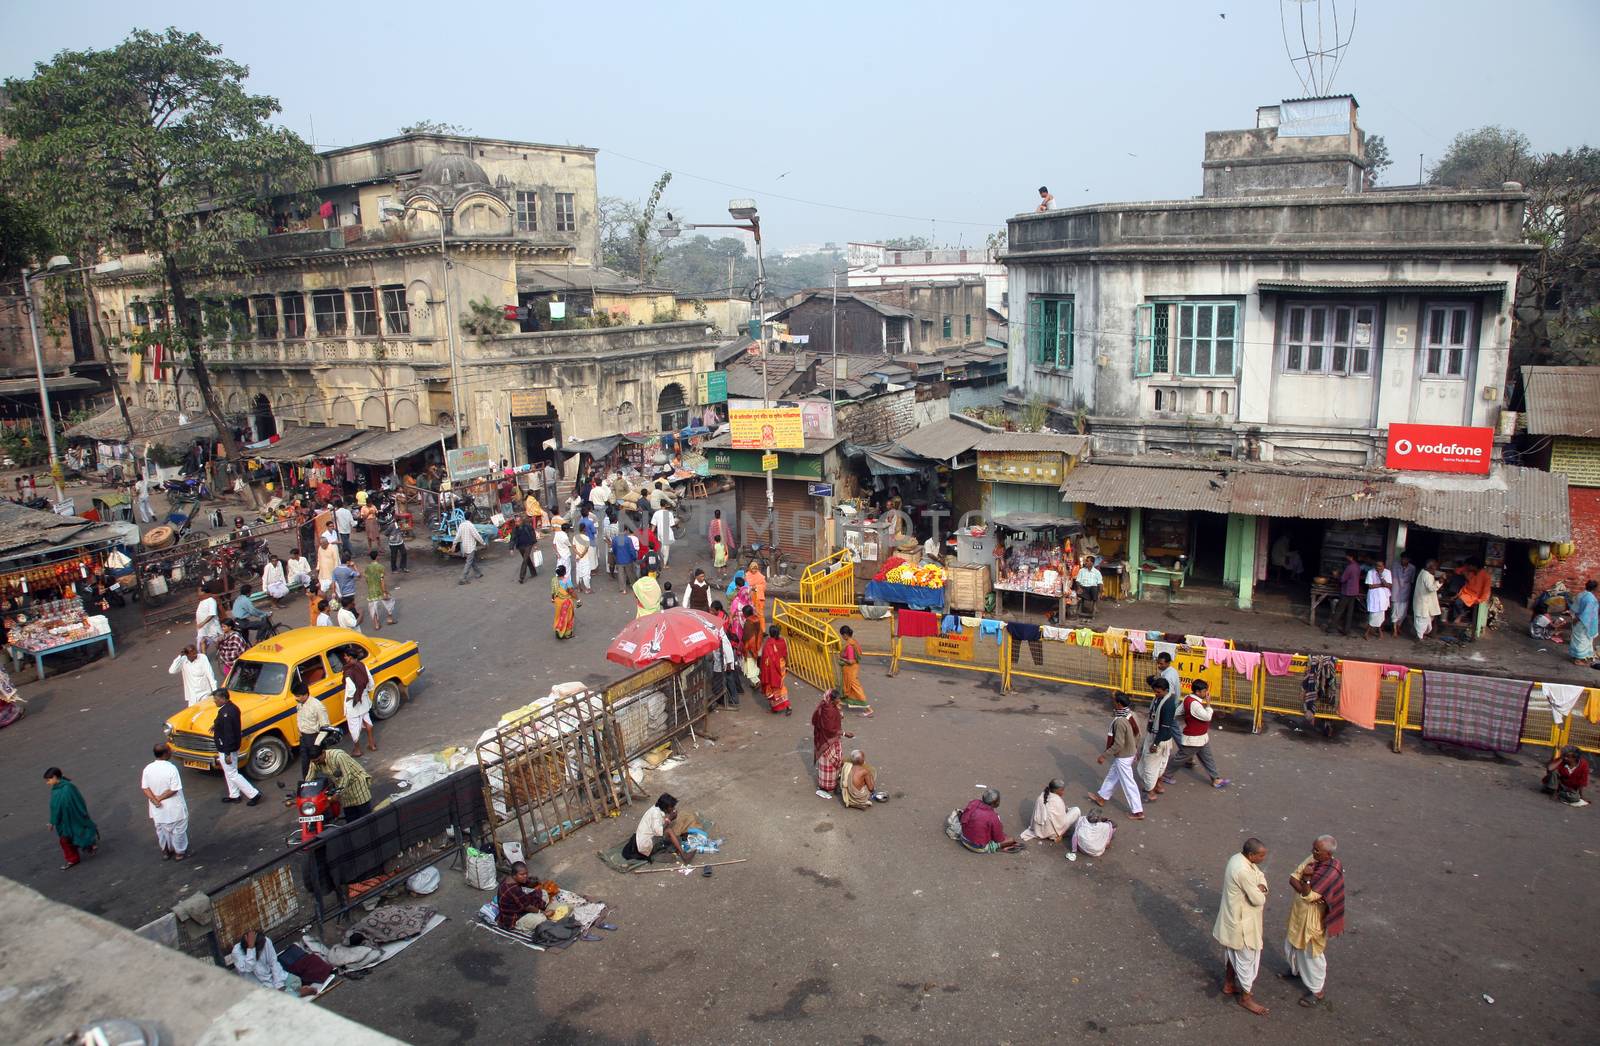 Tourists and visitors of famous Kalighat Kali Temple have rest near the shrine on January 24, 2009 in Kolkata. The name Calcutta to have been derived from the word Kalighat